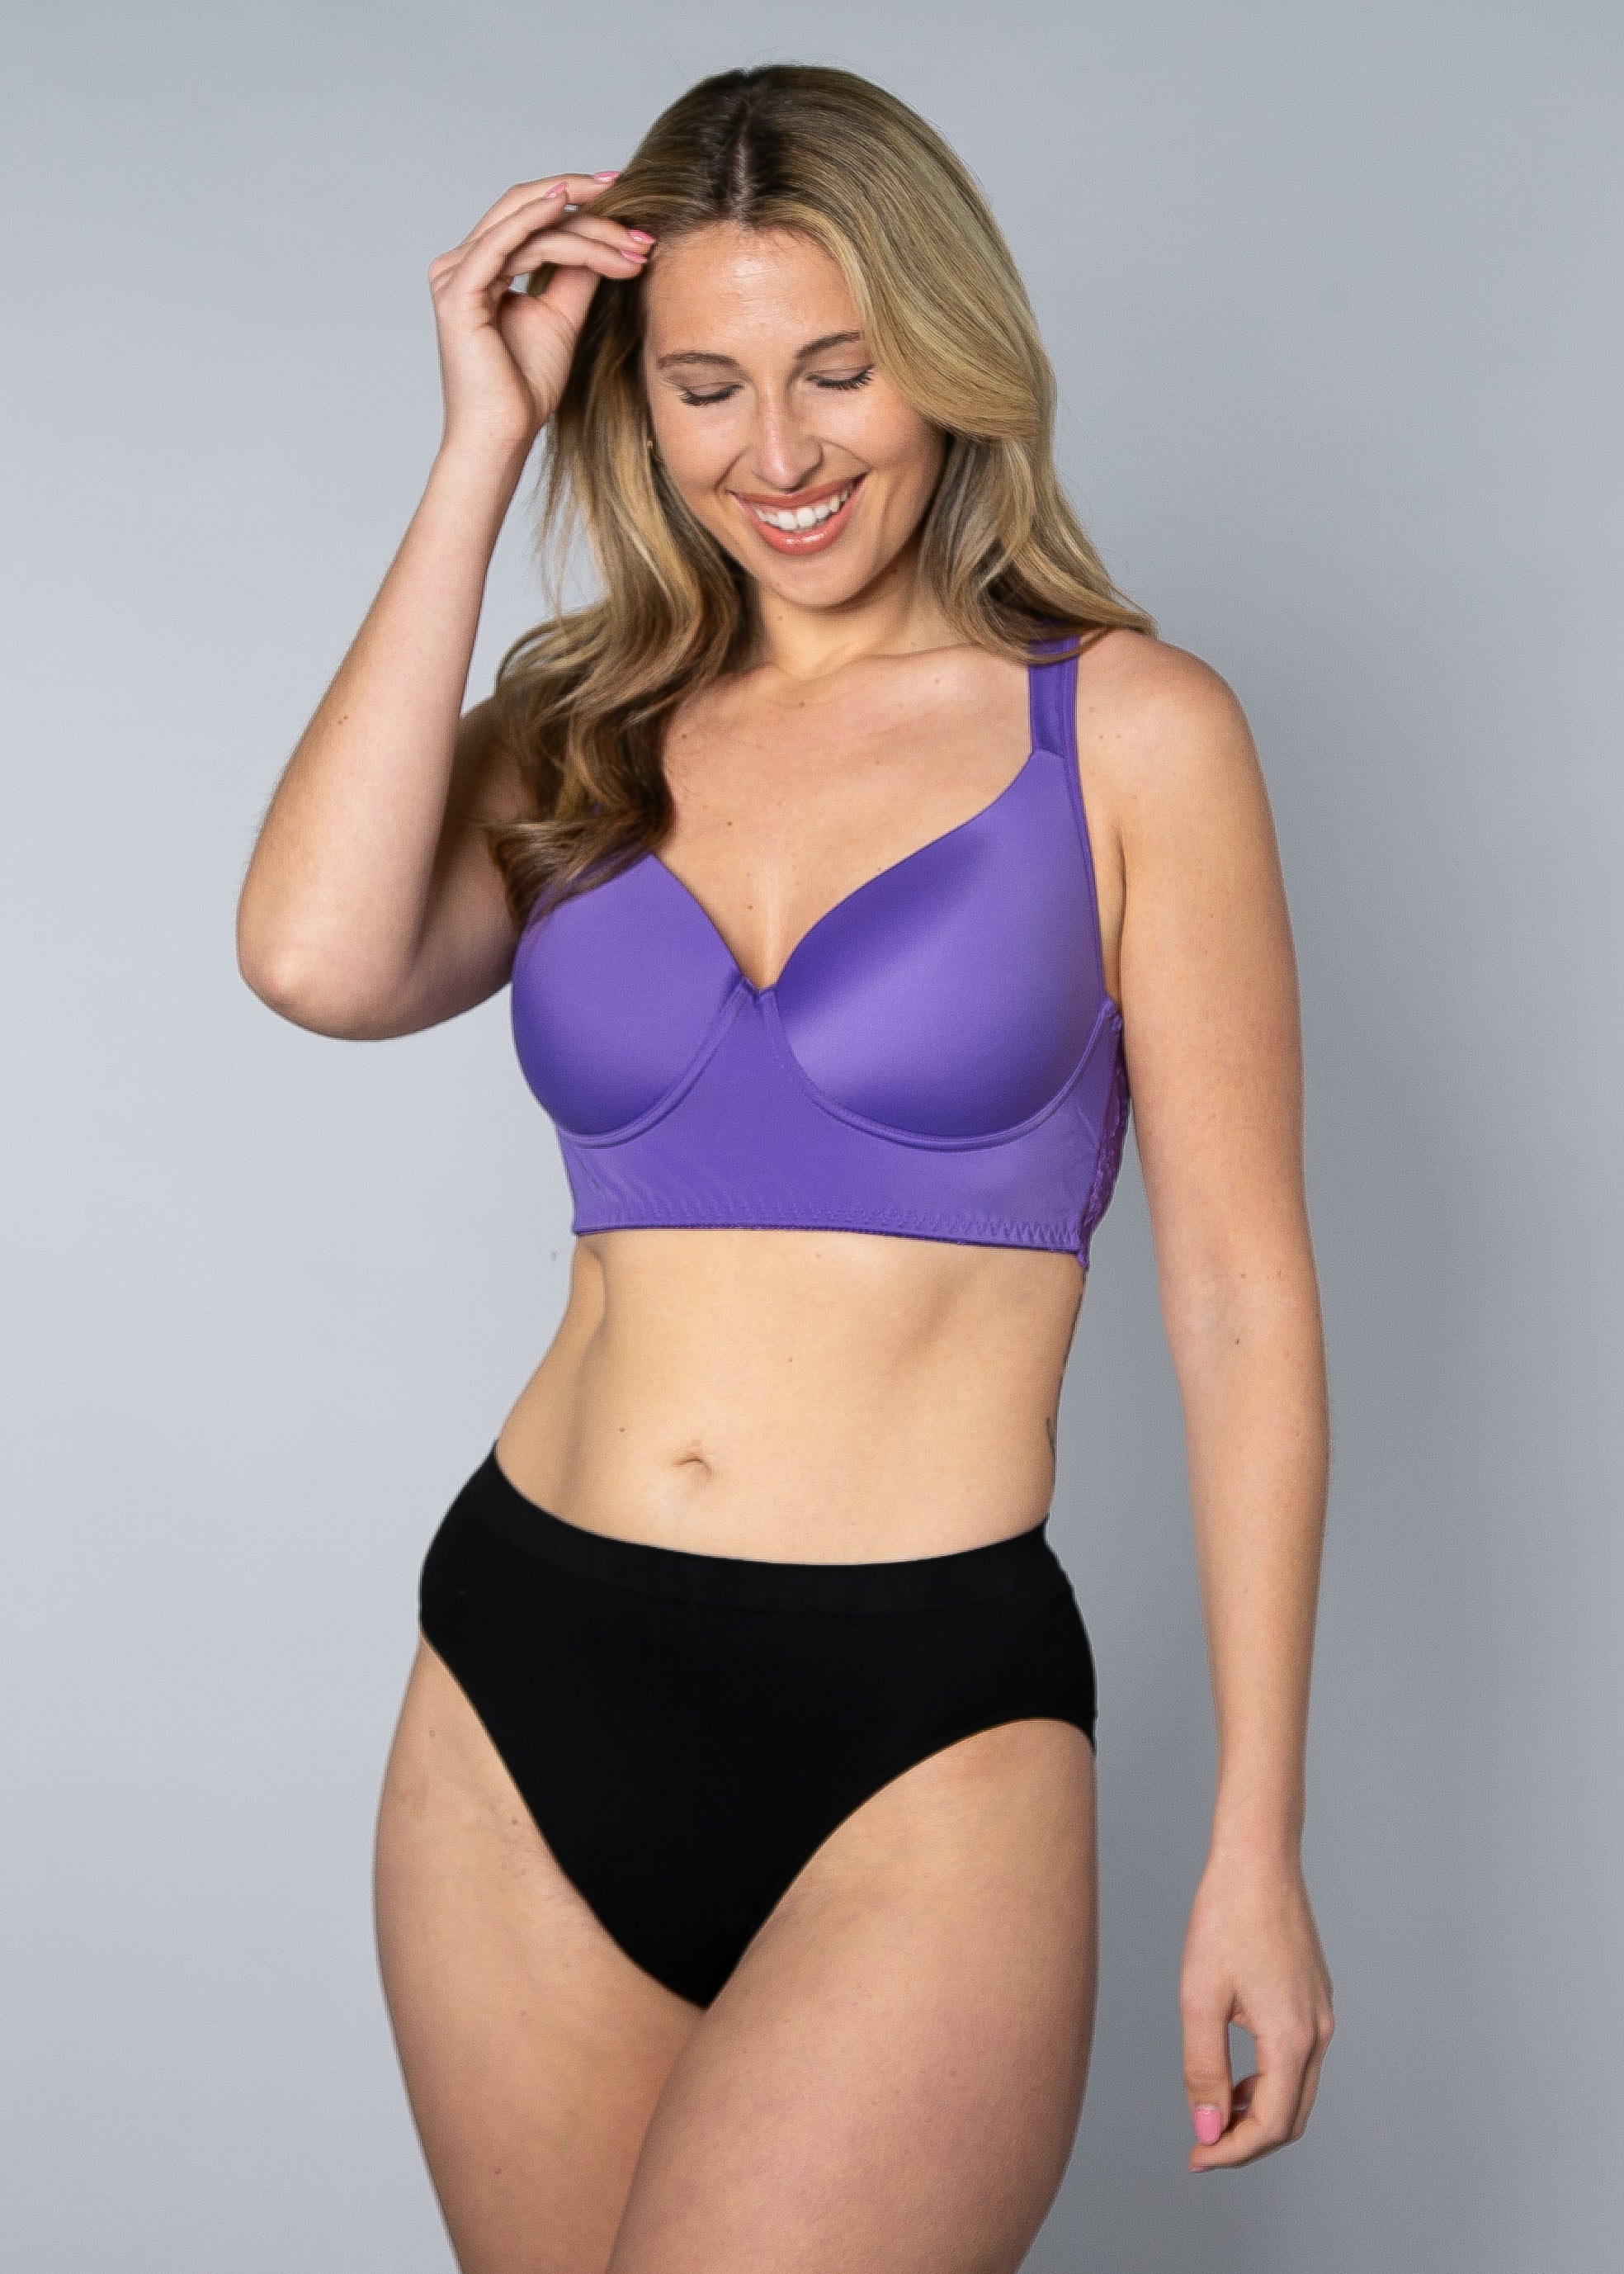 Wholesale plus size french lingerie For An Irresistible Look 